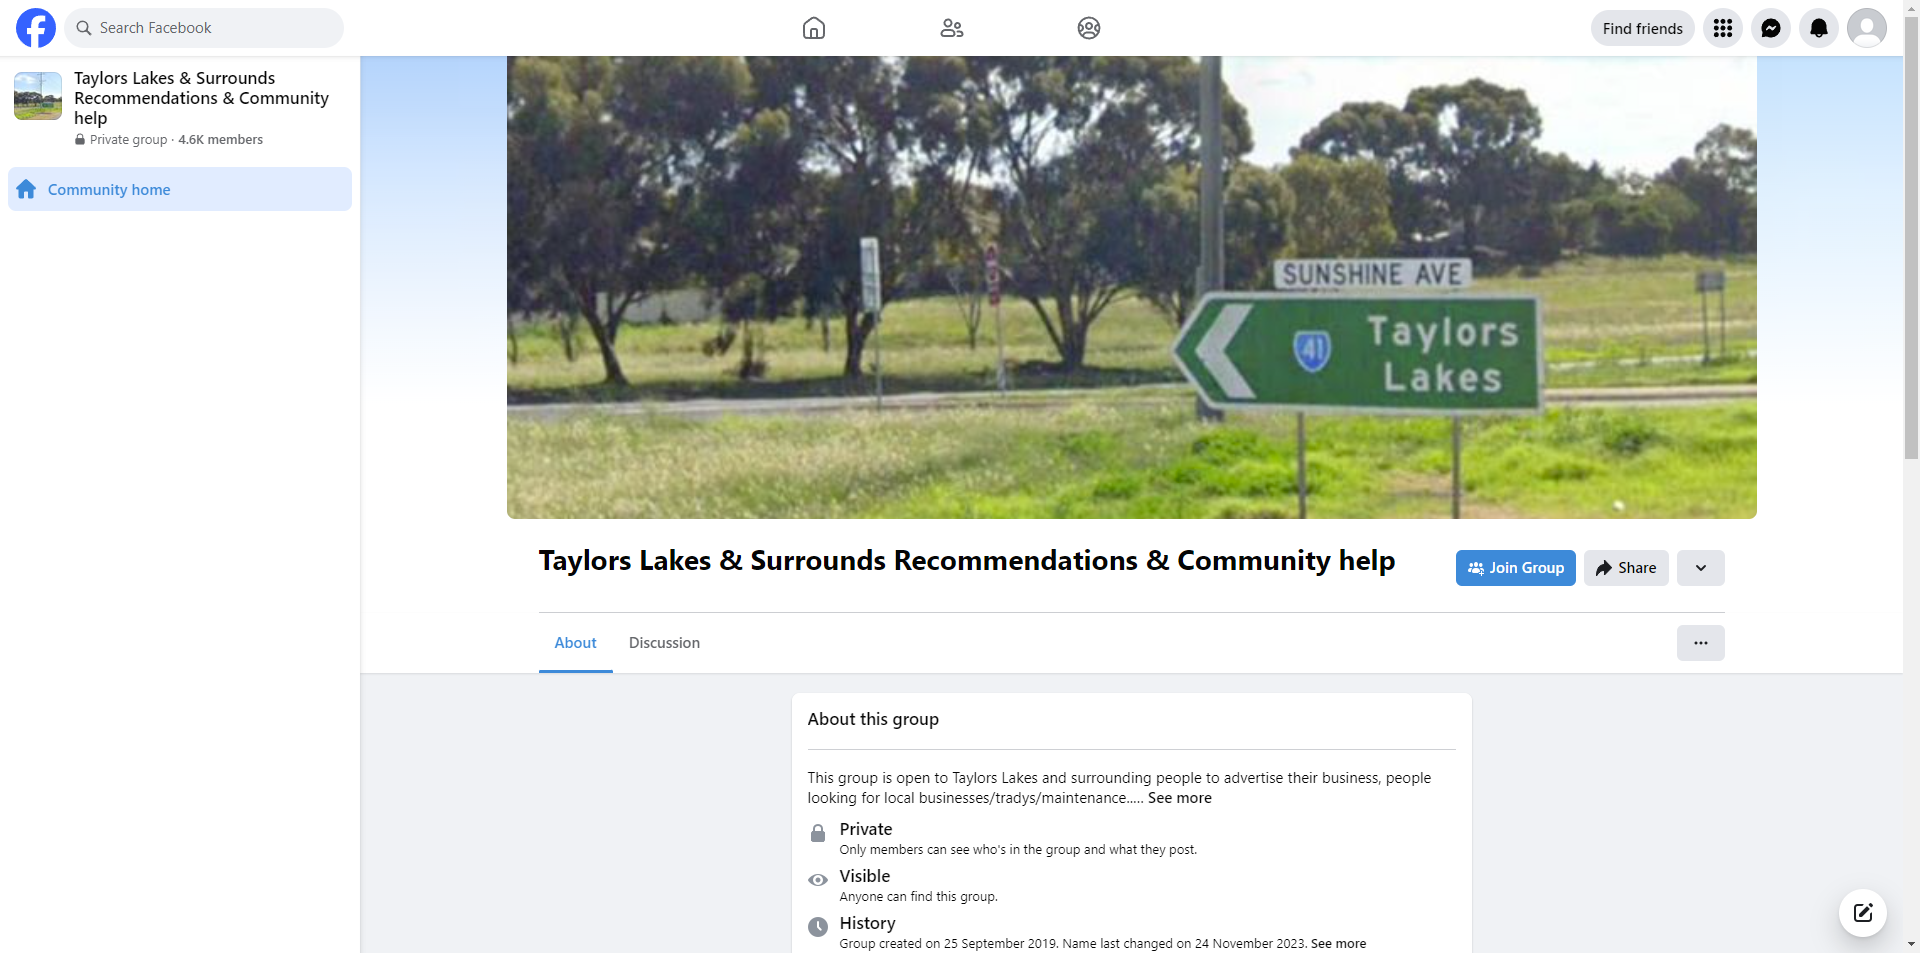 Taylors Lakes & Surrounds Recommendations & Community Help